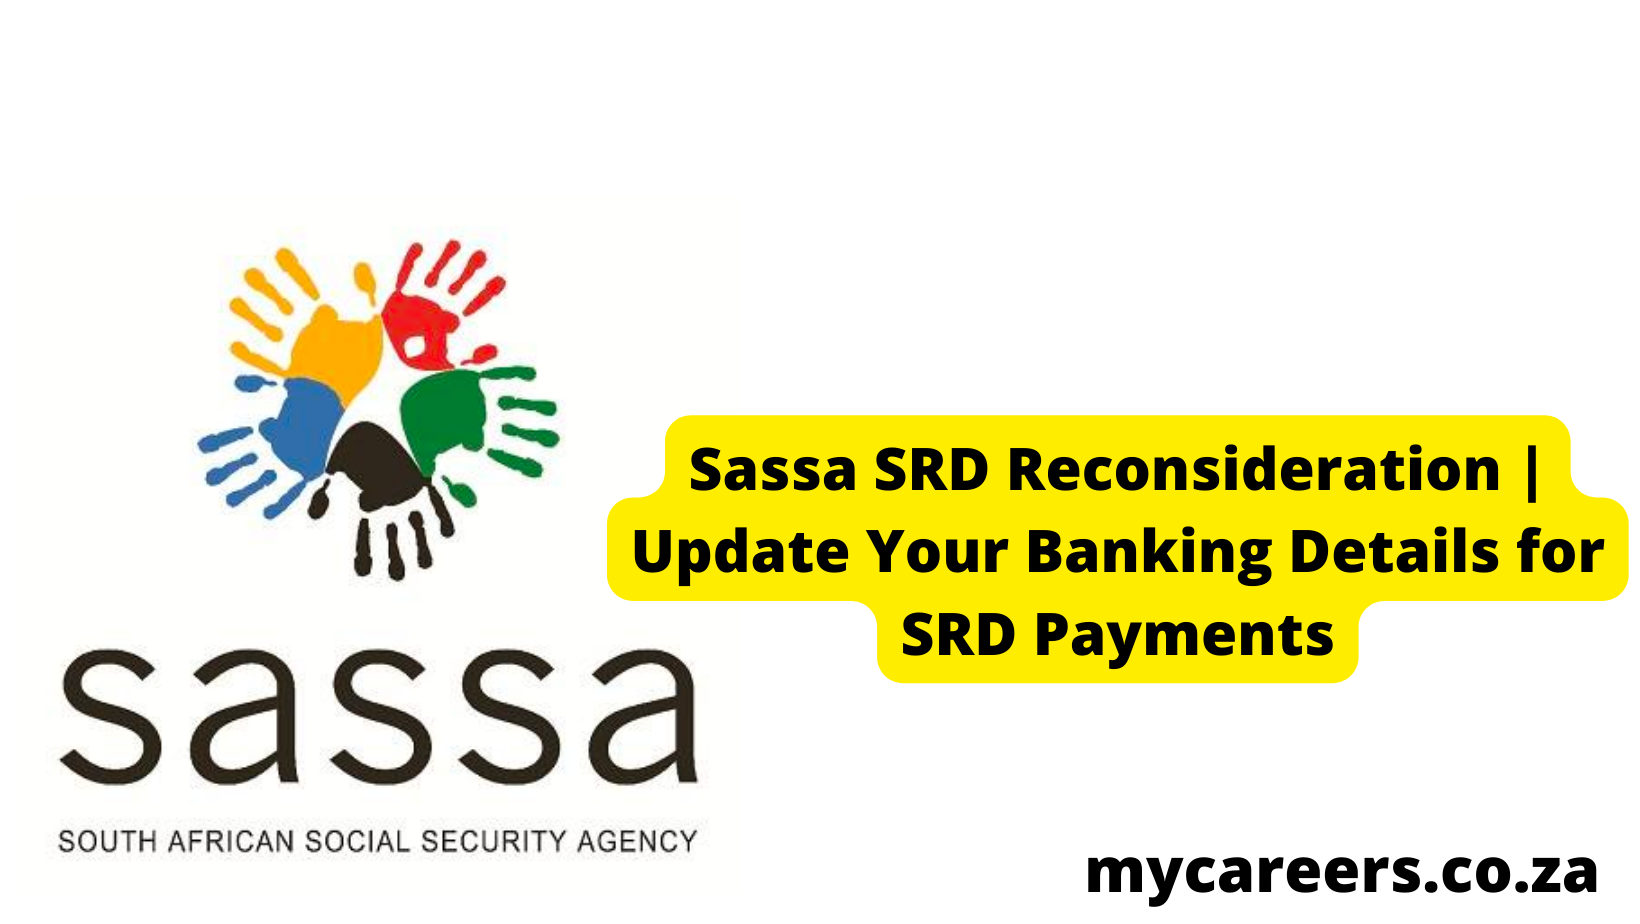 Sassa SRD Reconsideration | Update Your Banking Details for SRD Payments